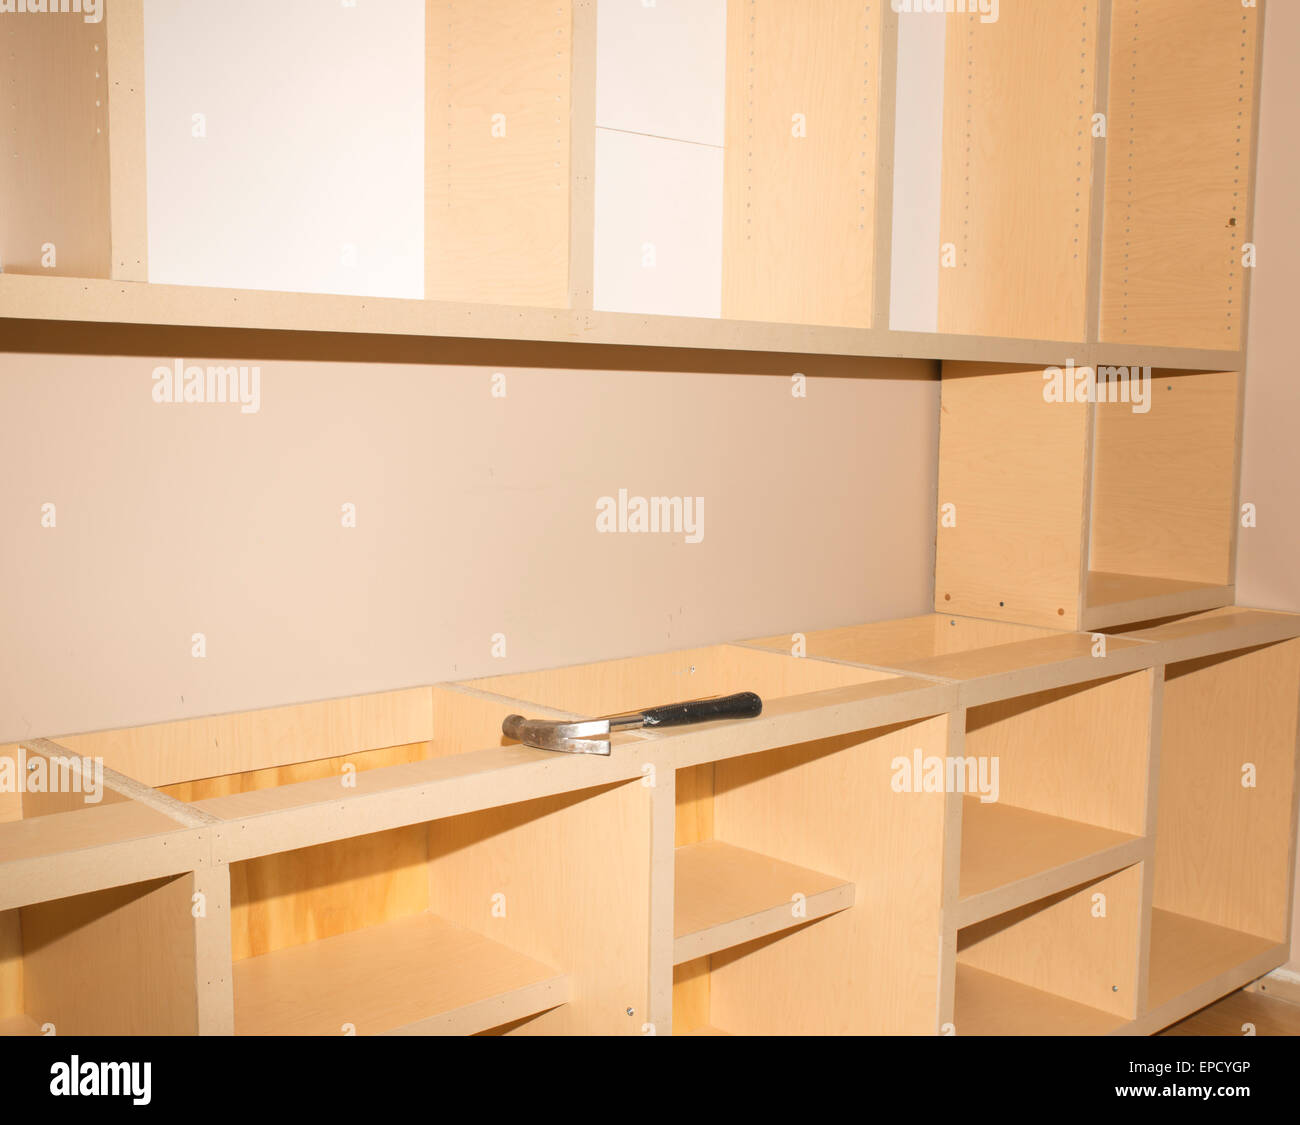 Partially constructed wall unit in a home renovation project Stock Photo